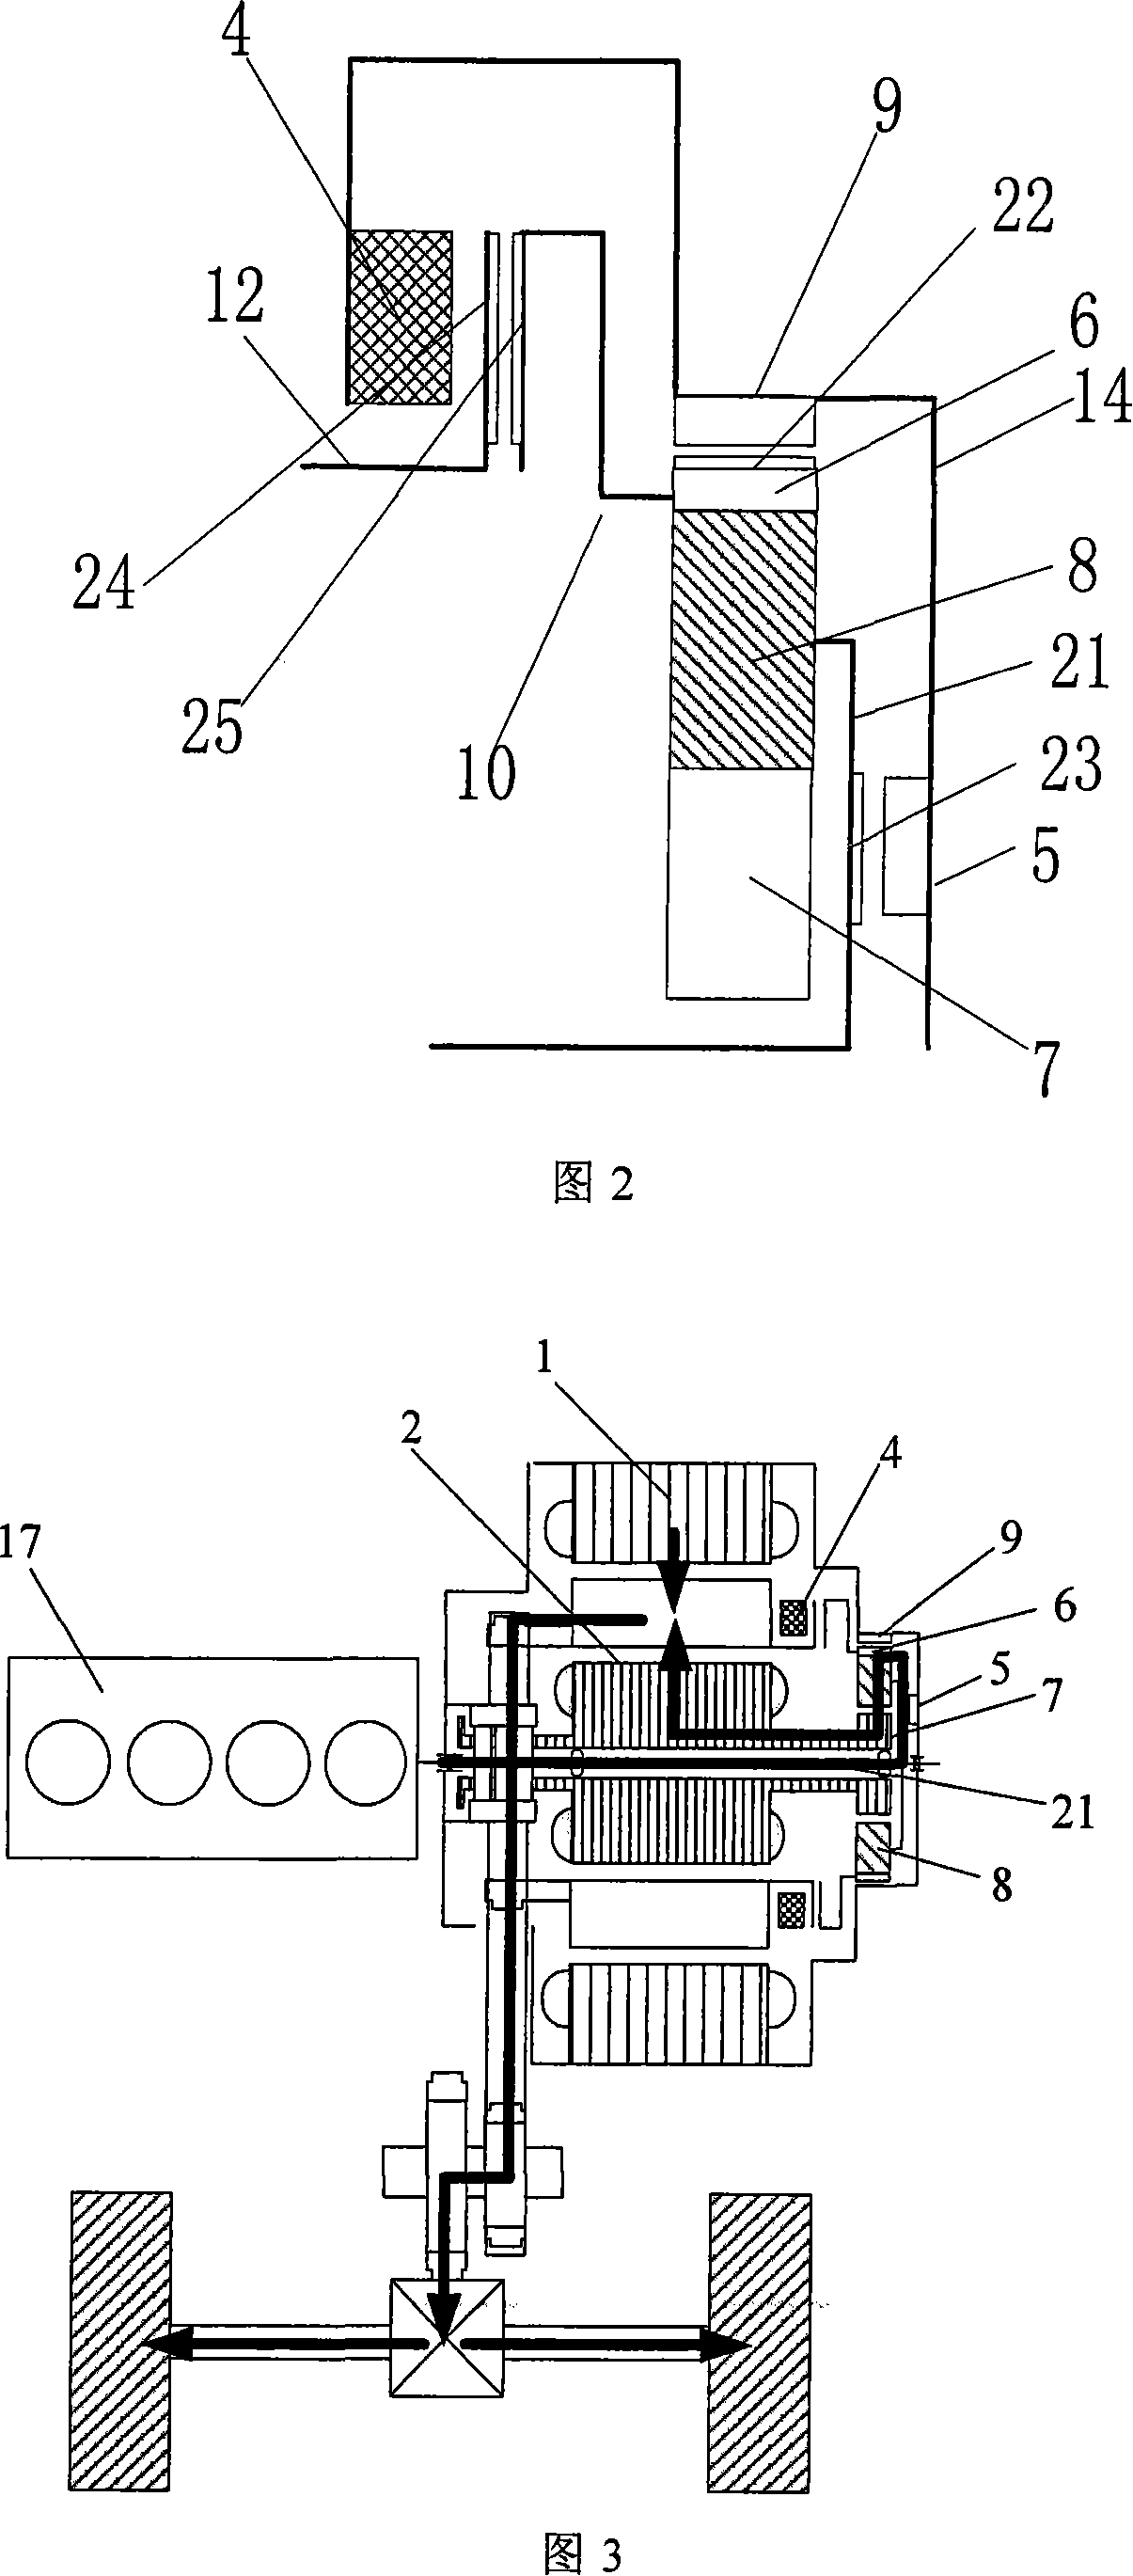 Electrical variable-speed case and its dynamic mode